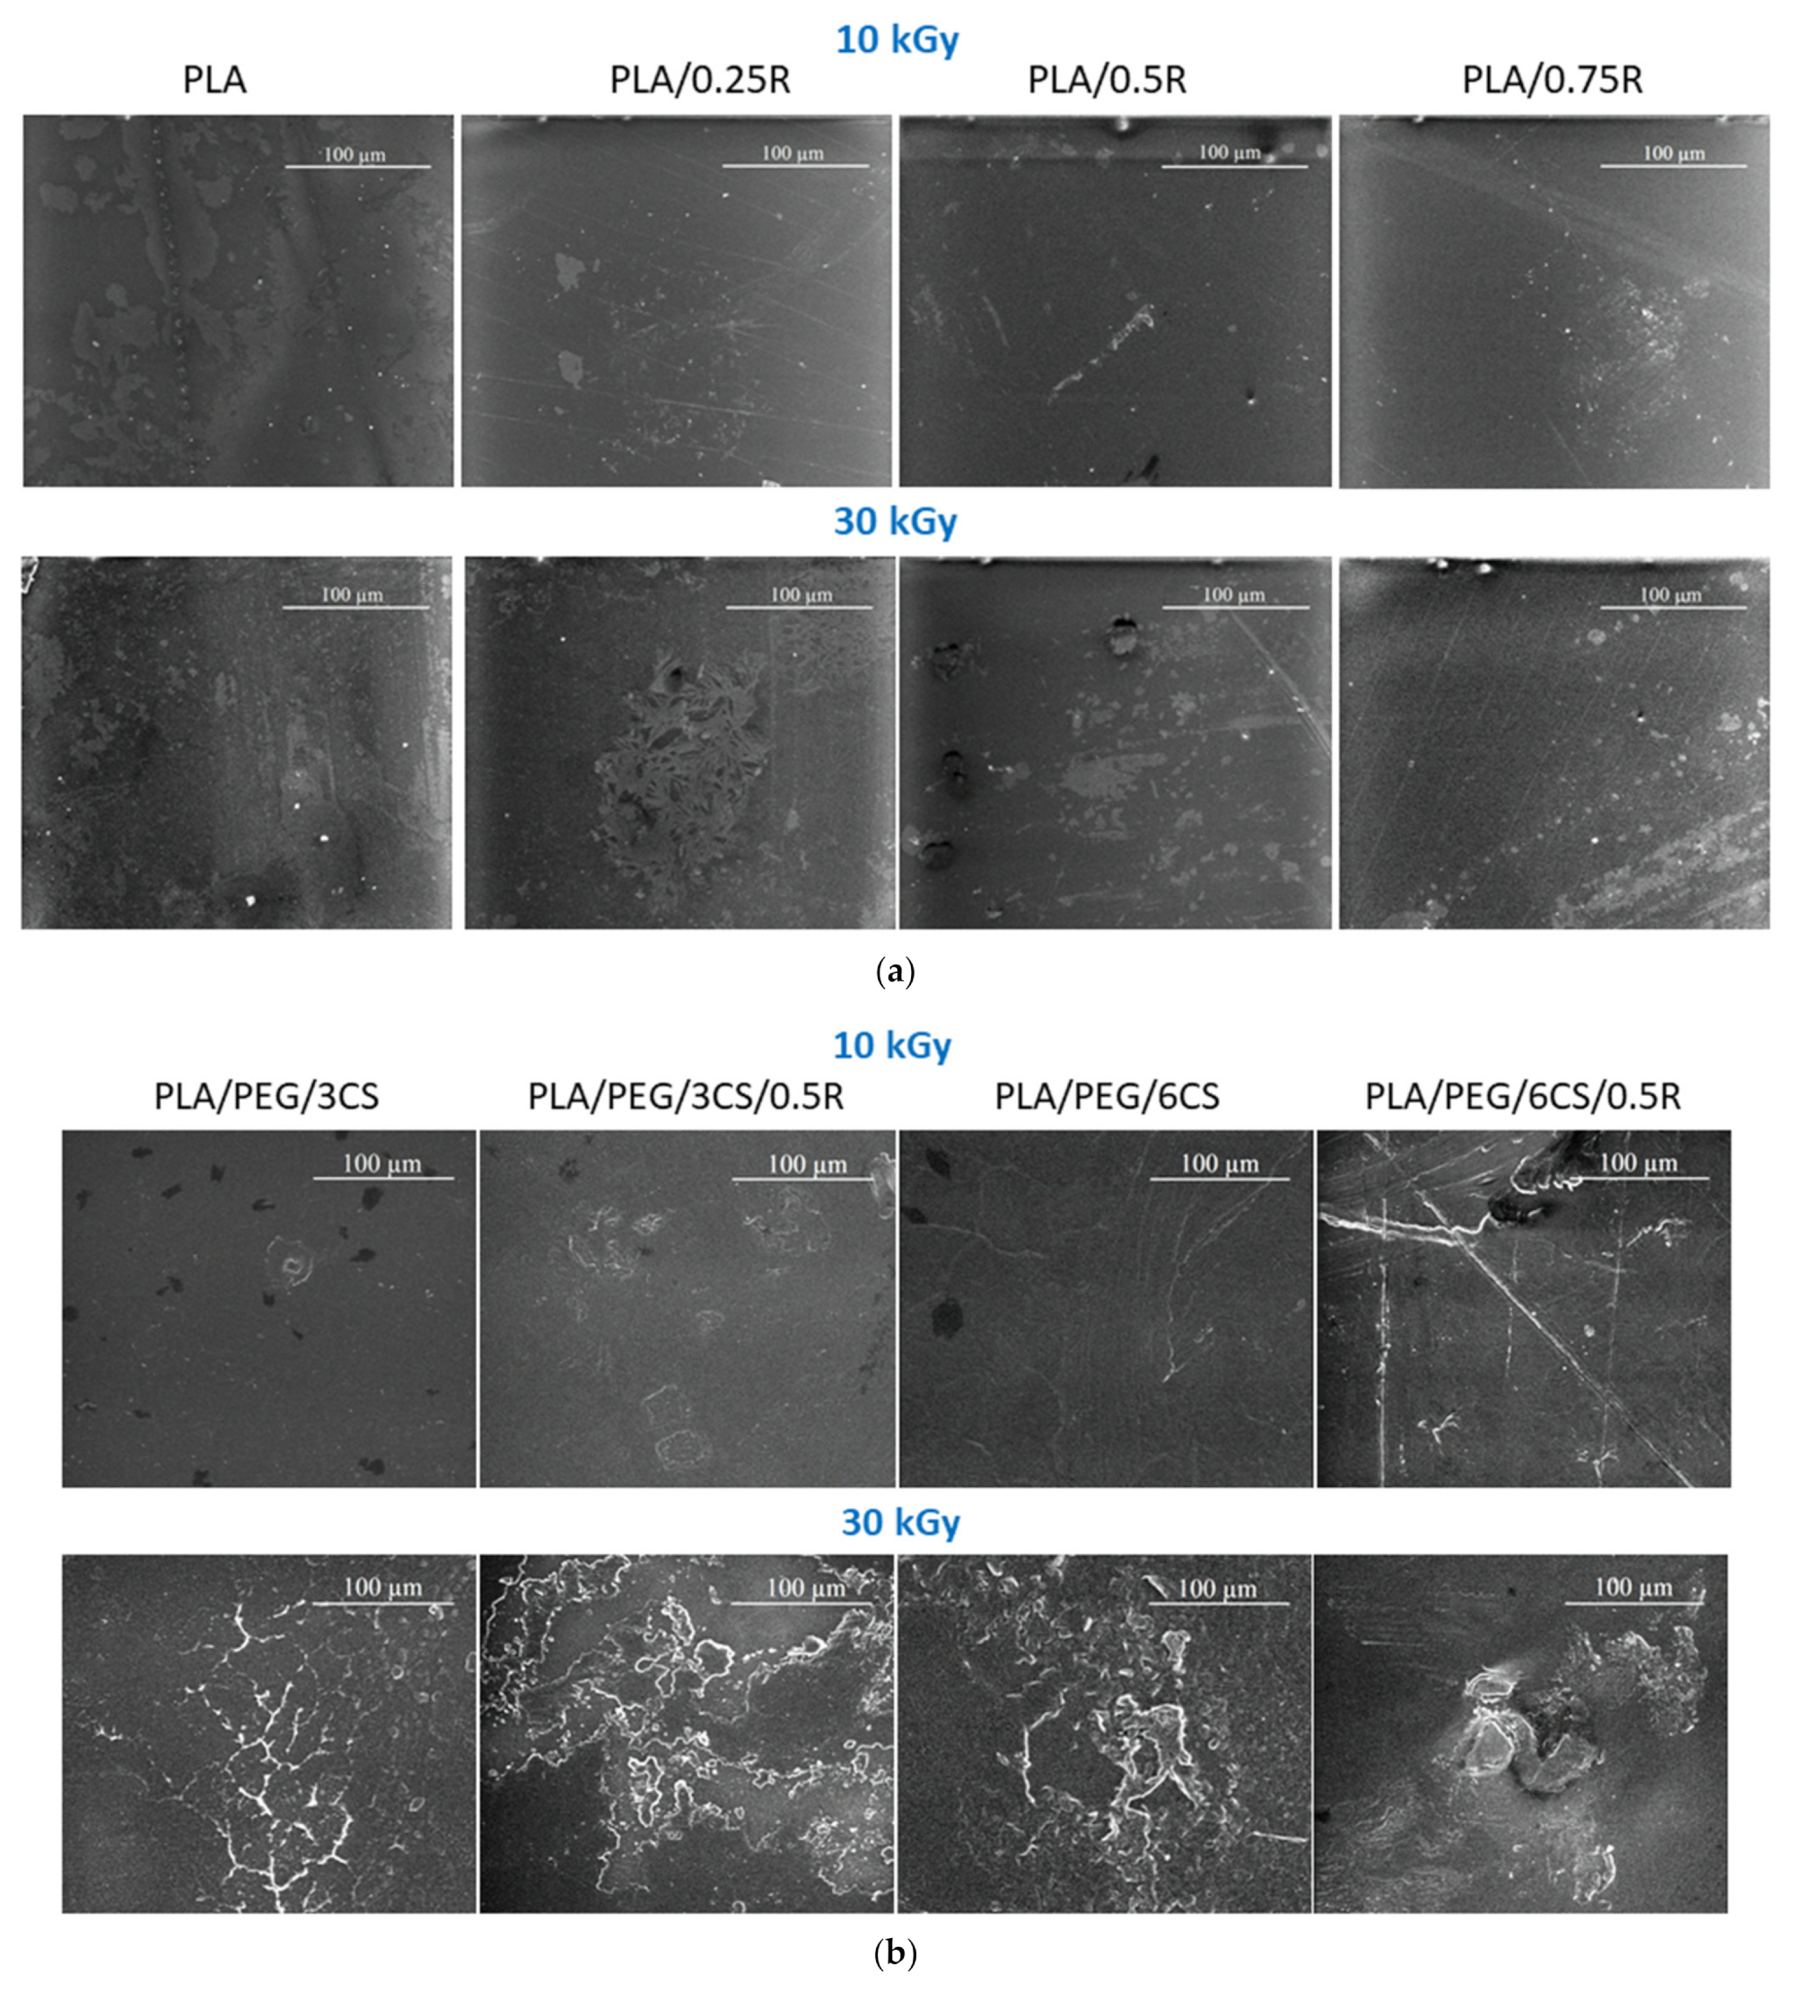 SEM pictures of the surface of the PLA and PLA/R blends (a), and of PLA/PEG/CS and PLA/PEG/CS/R biocomposites (b) at various gamma irradiation doses; magnification 1000×, scale—100 µm.